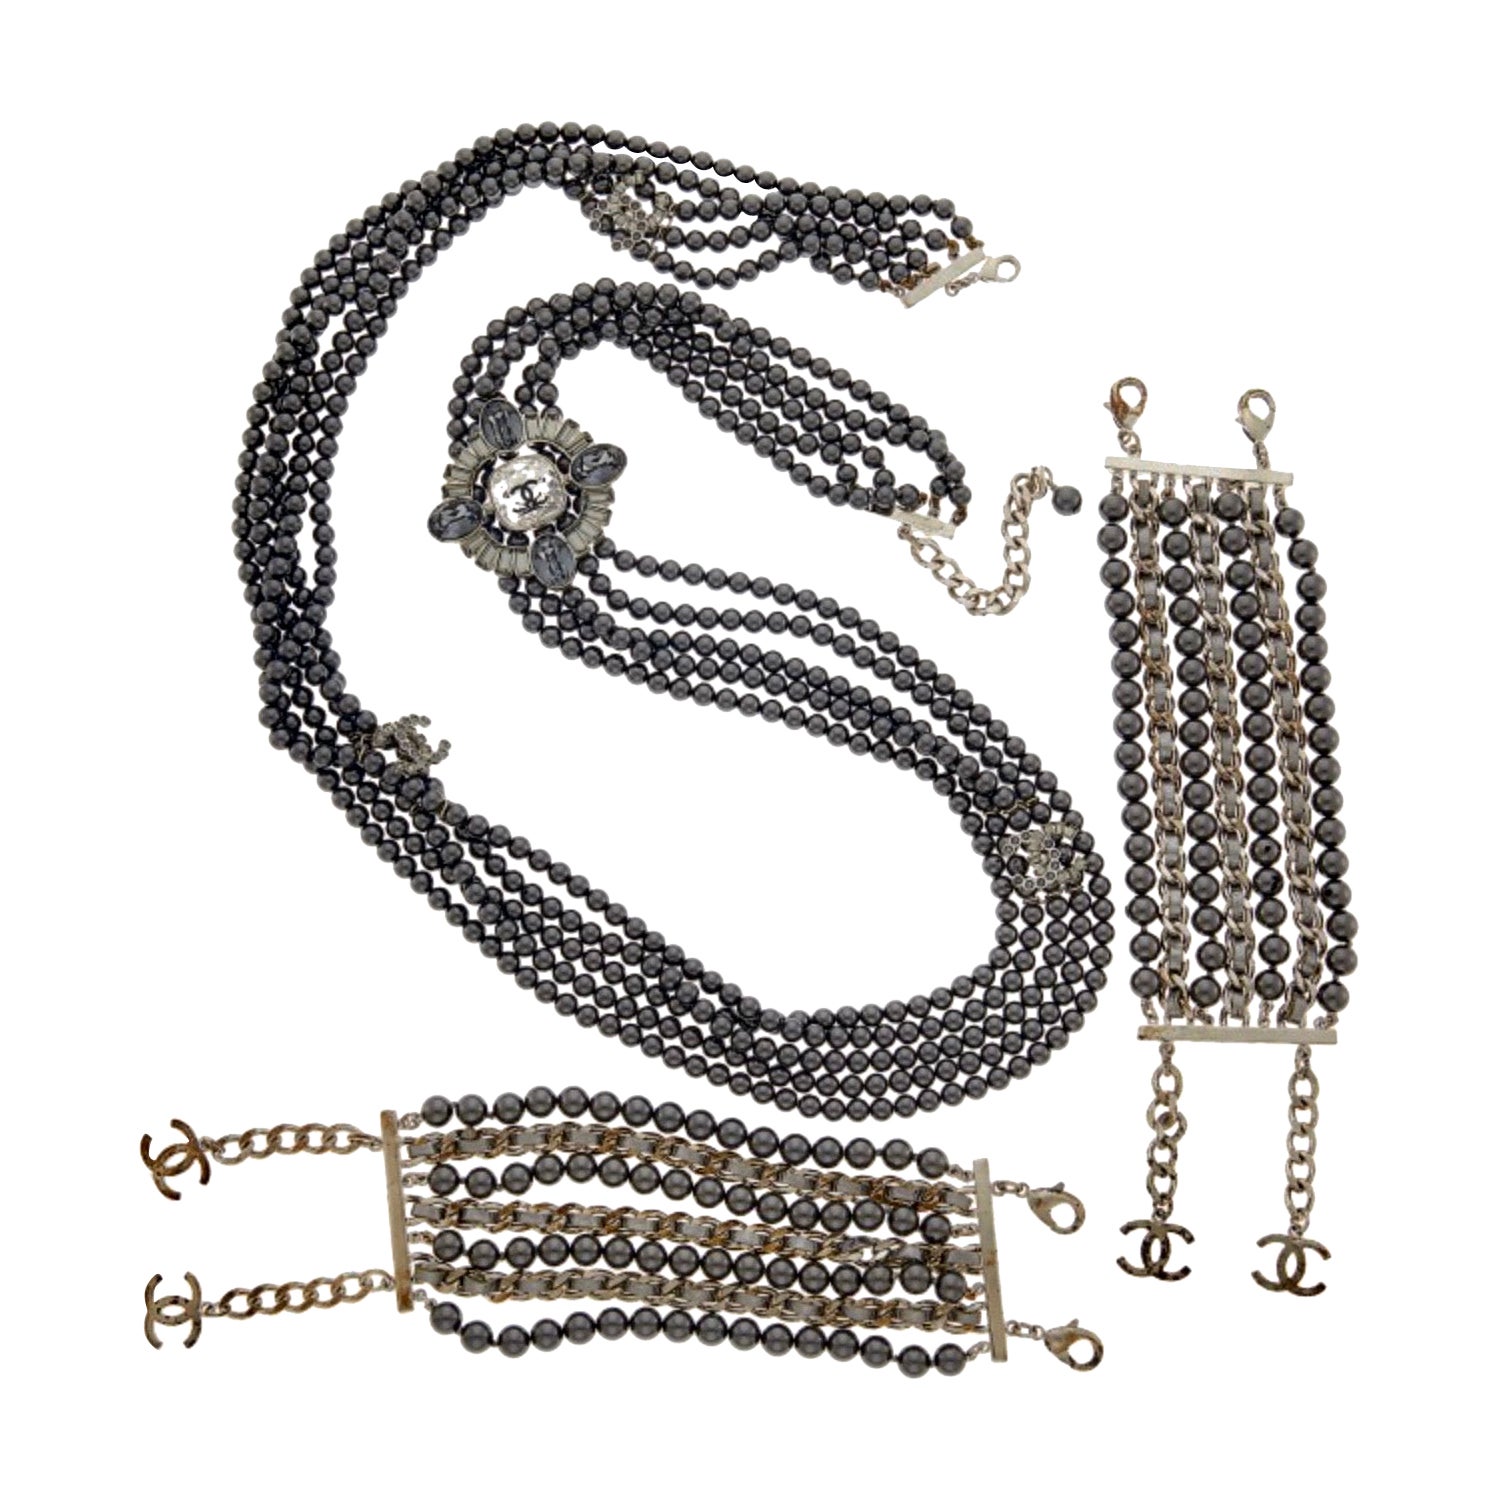 Sold at Auction: Chanel Beaded Glass Black Pearl Camelia Necklace